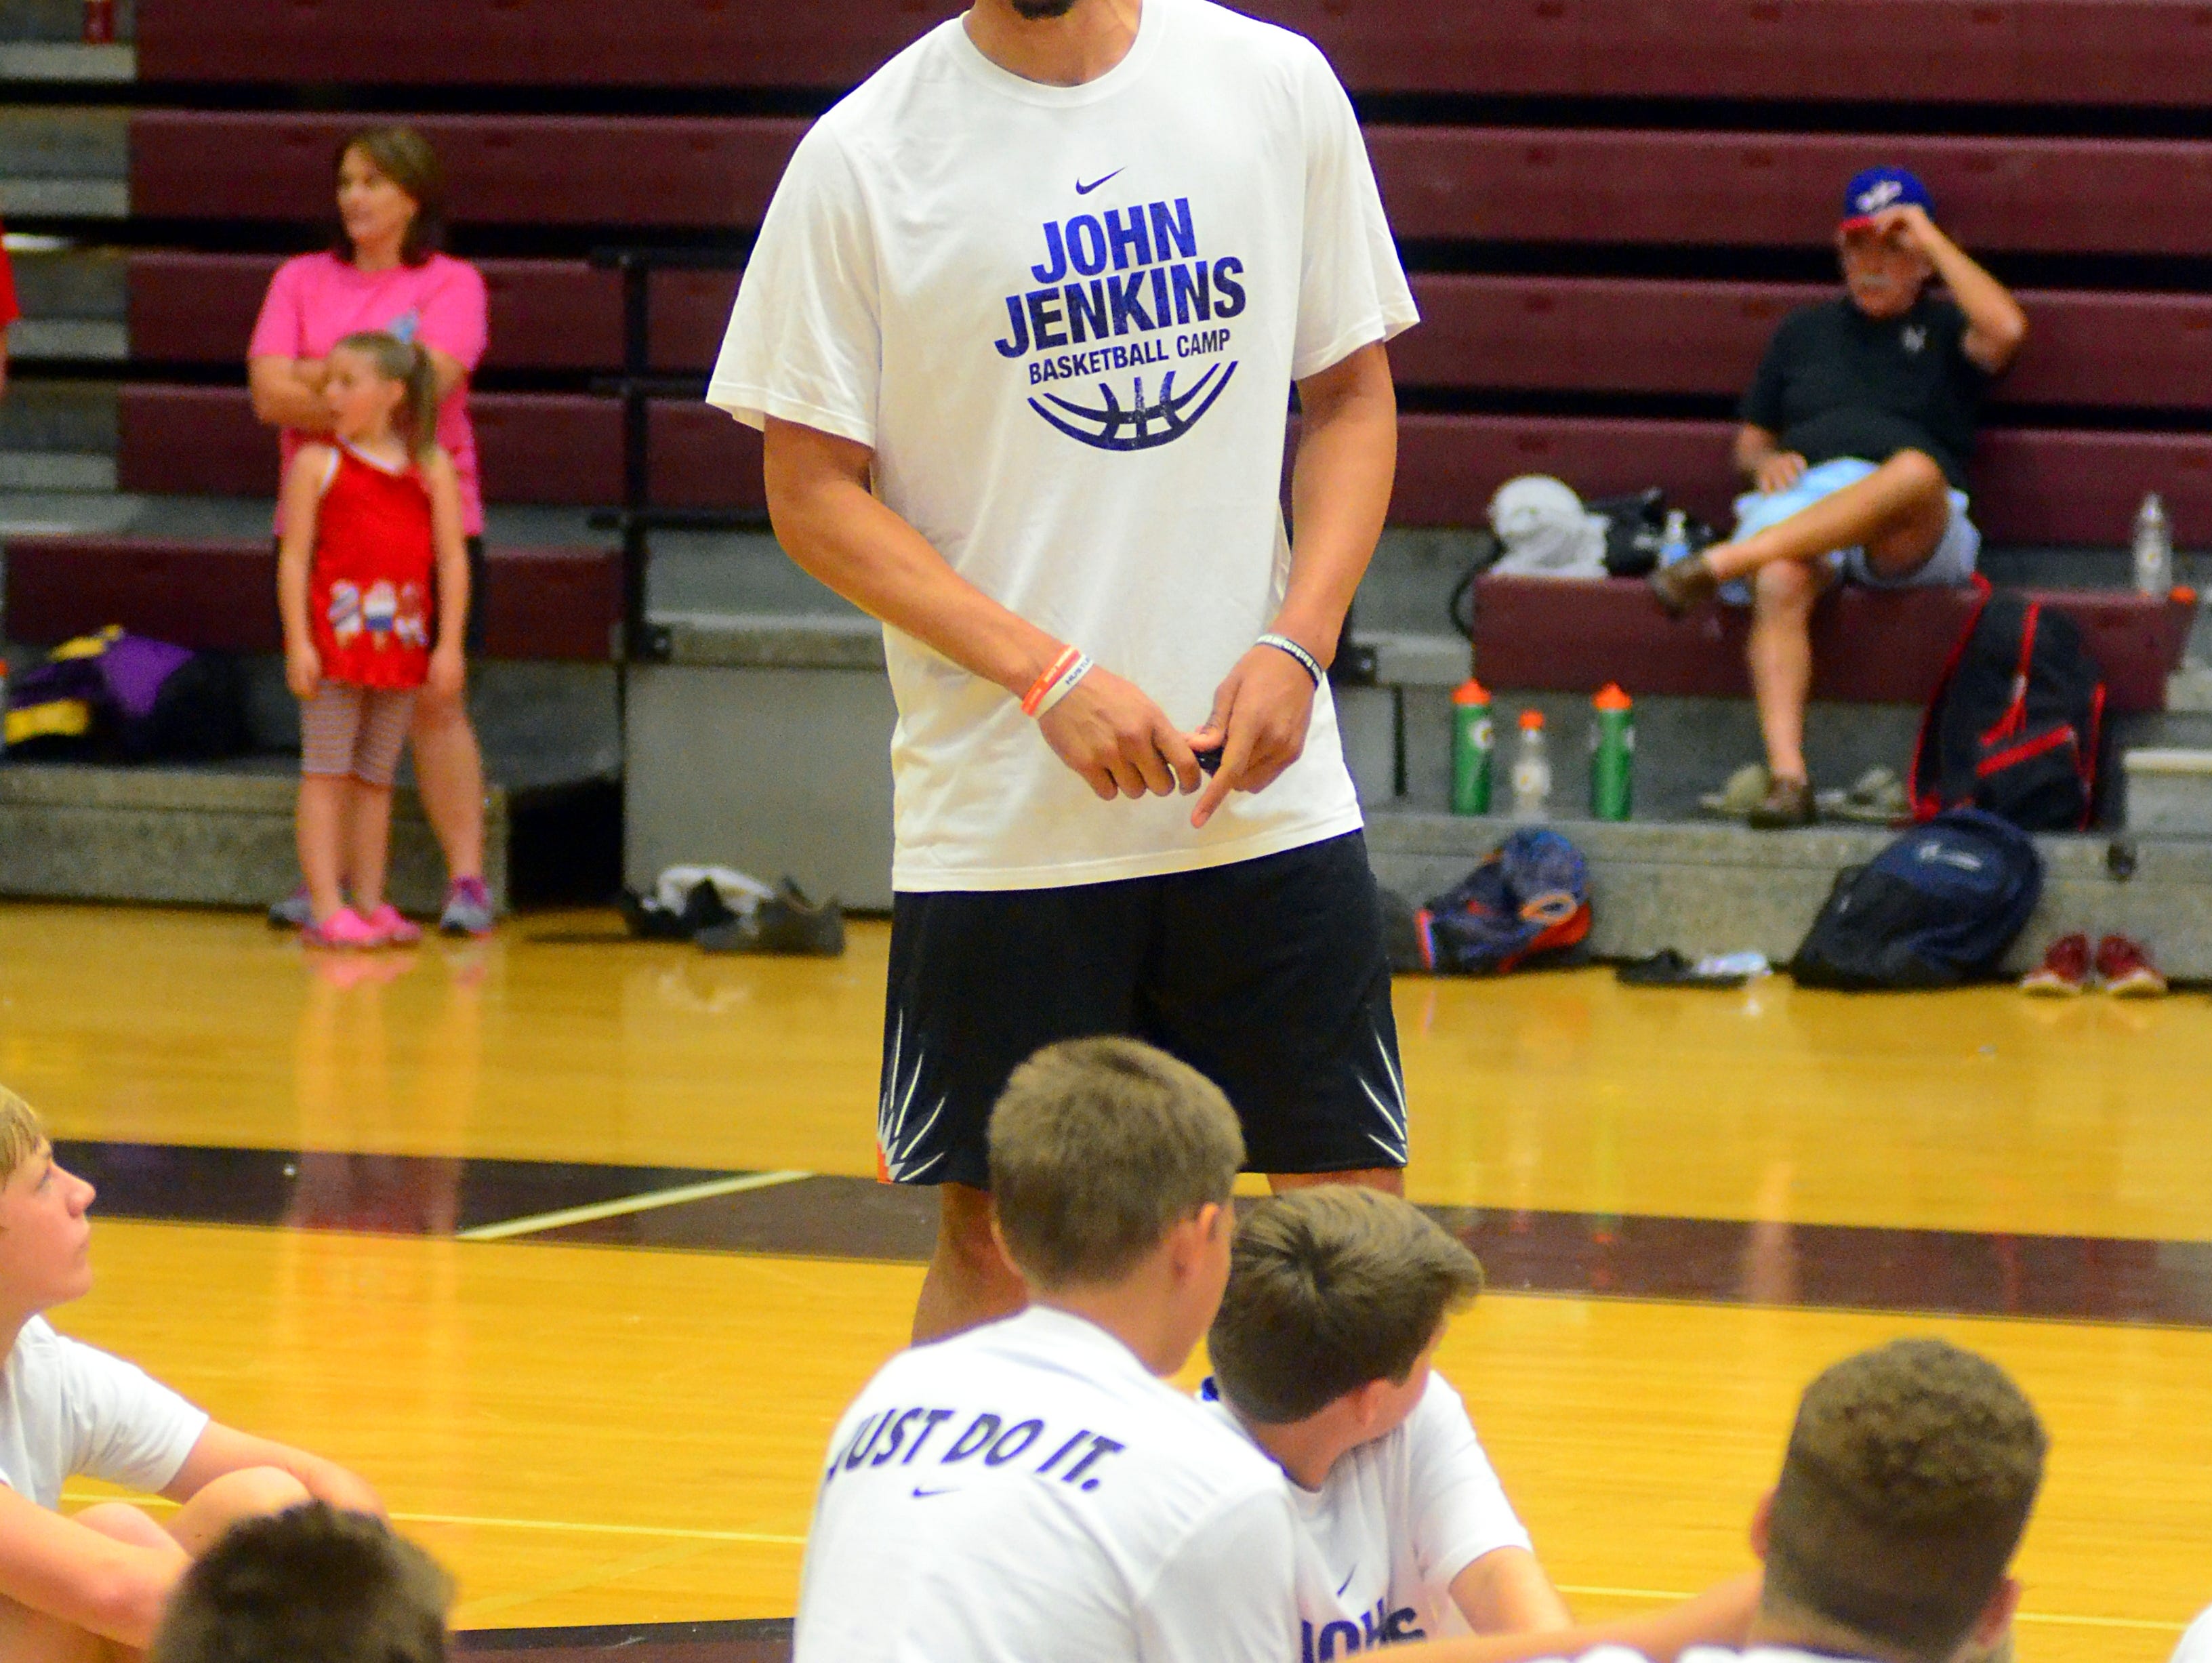 Jenkins speaks to campers following the conclusion of Friday’s session of his fourth annual basketball camp at Station Camp High School.